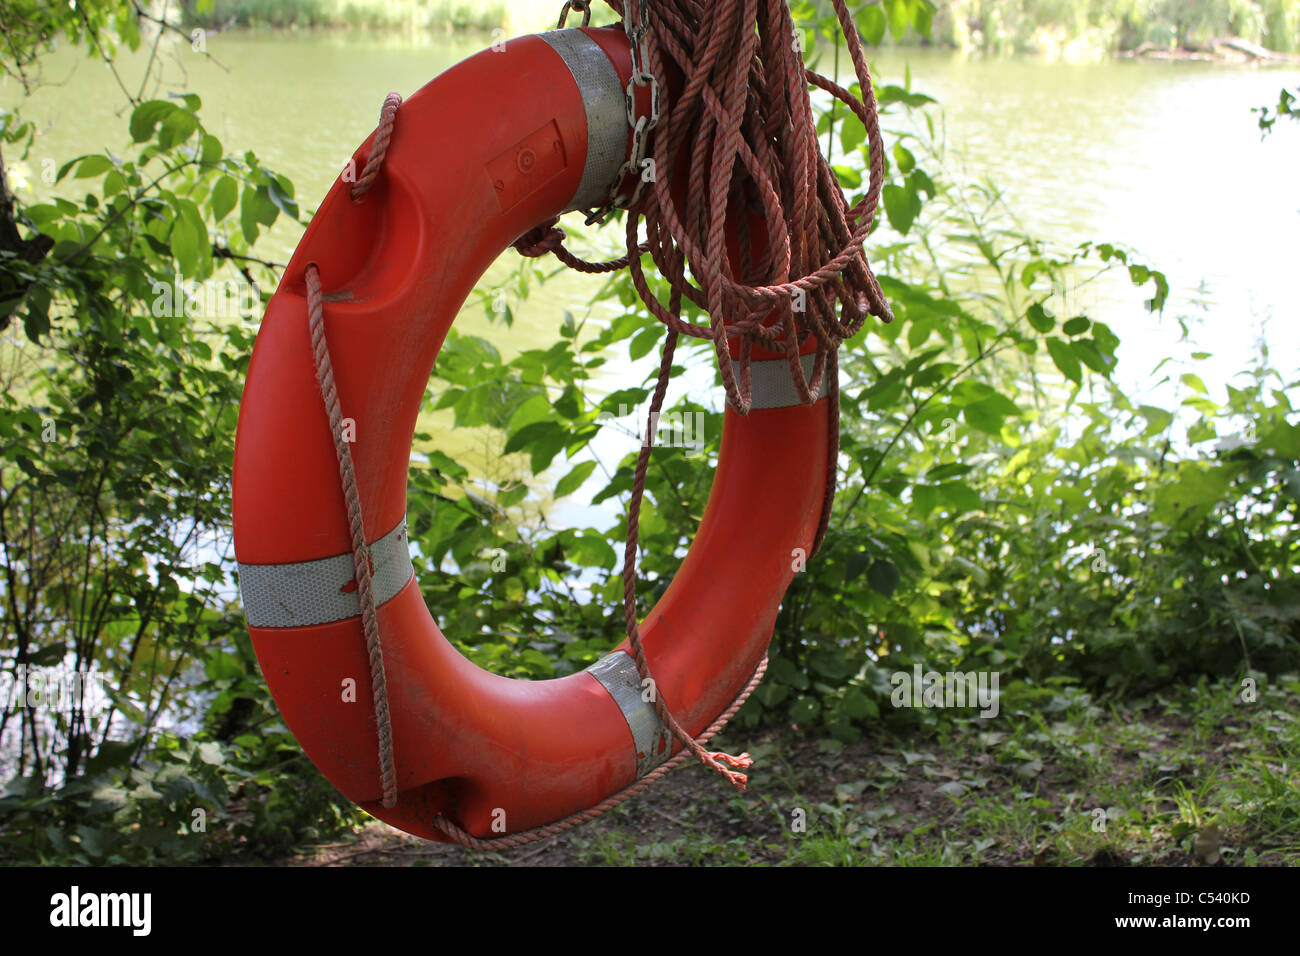 Life-buoy hanging with lake view in the background Stock Photo